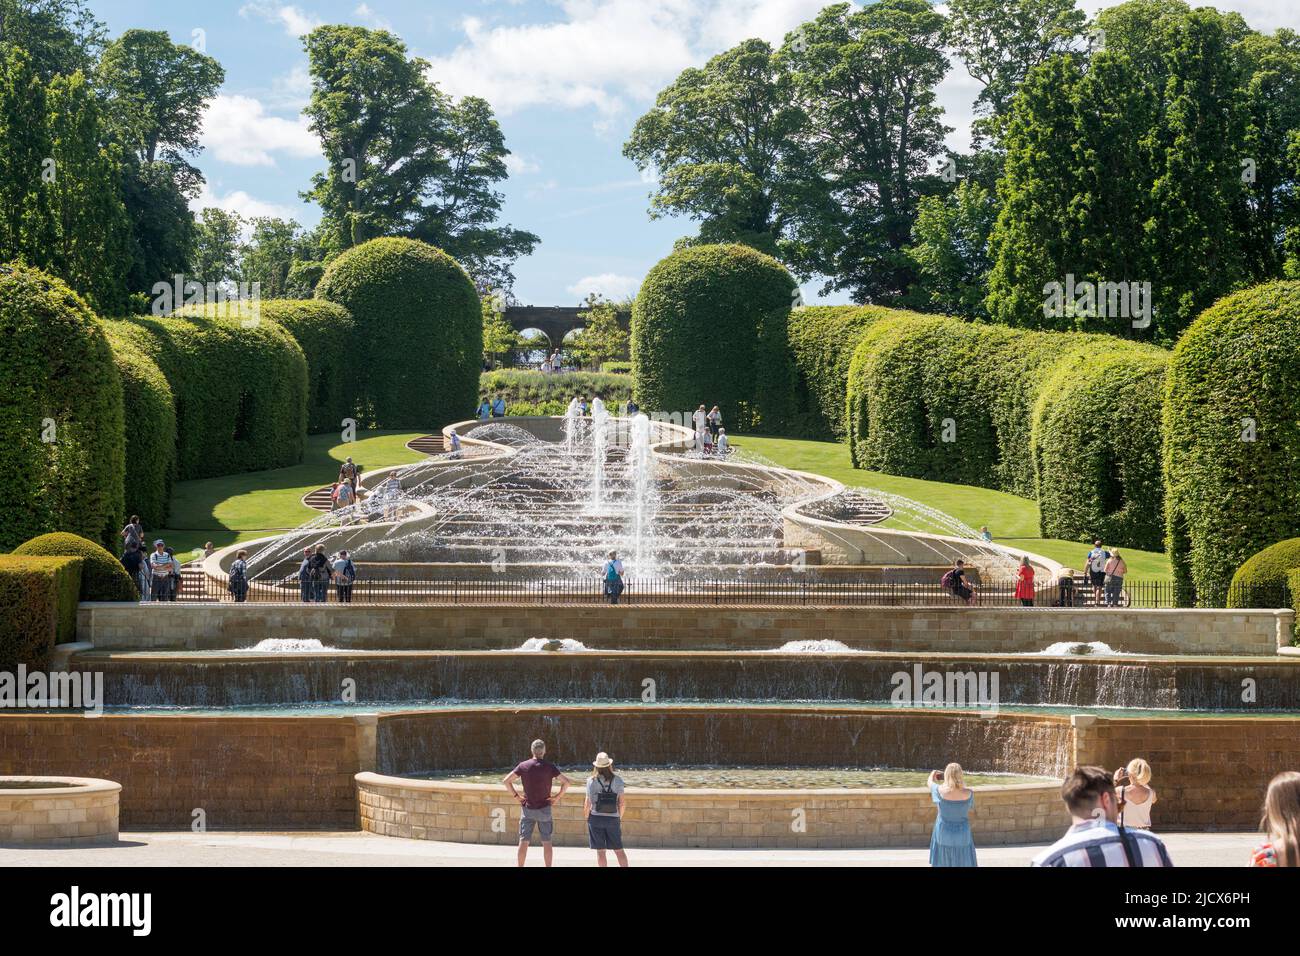 The grand cascade or water feature with fountains in Alnwick Gardens, Northumberland, England, UK Stock Photo